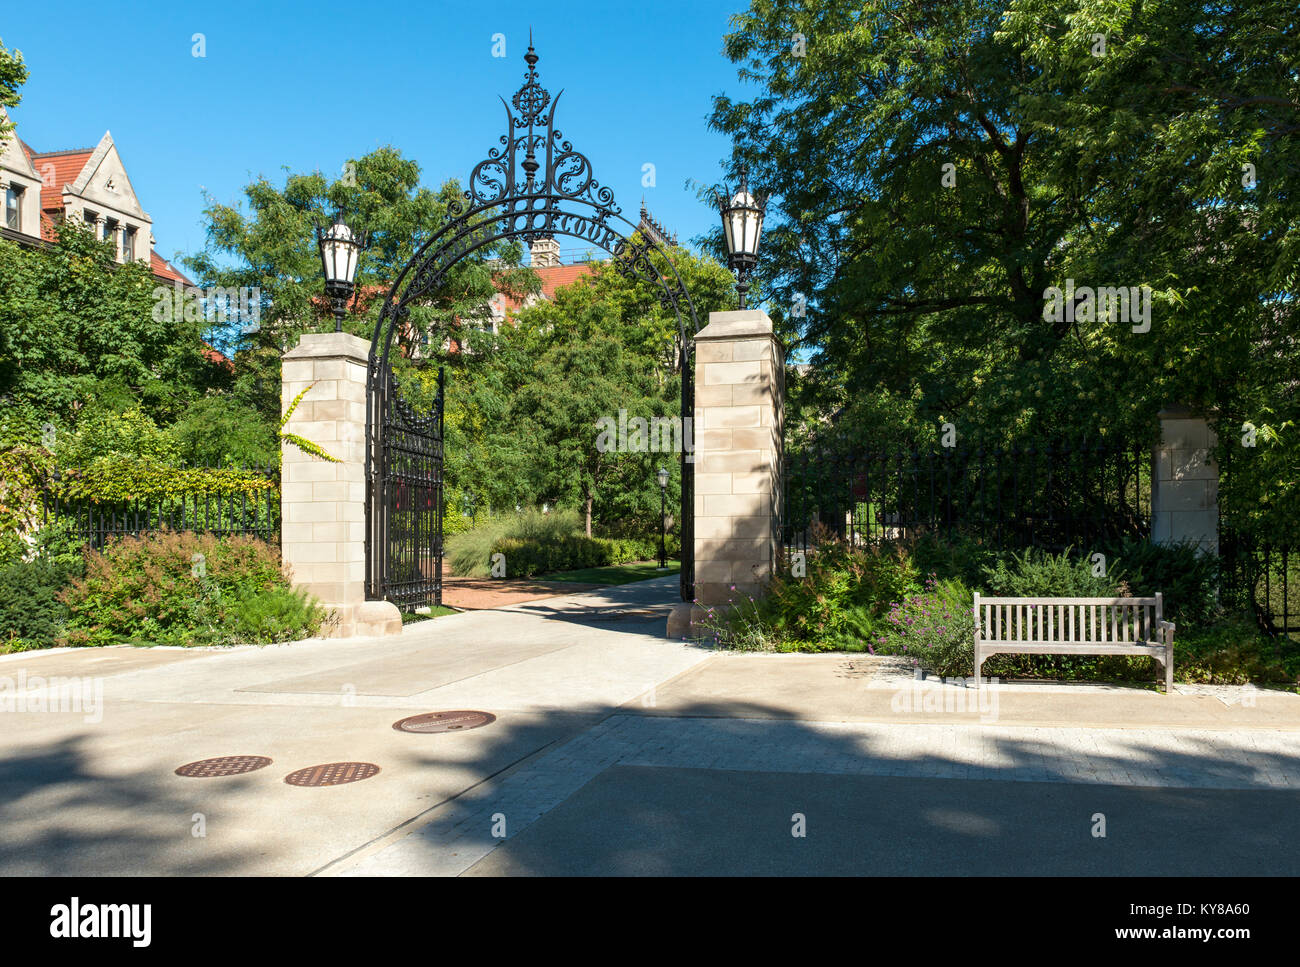 Entry arched gate to the Hull Court at University of Chicago is an example of Gothic Revival style in Chicago architecture Stock Photo